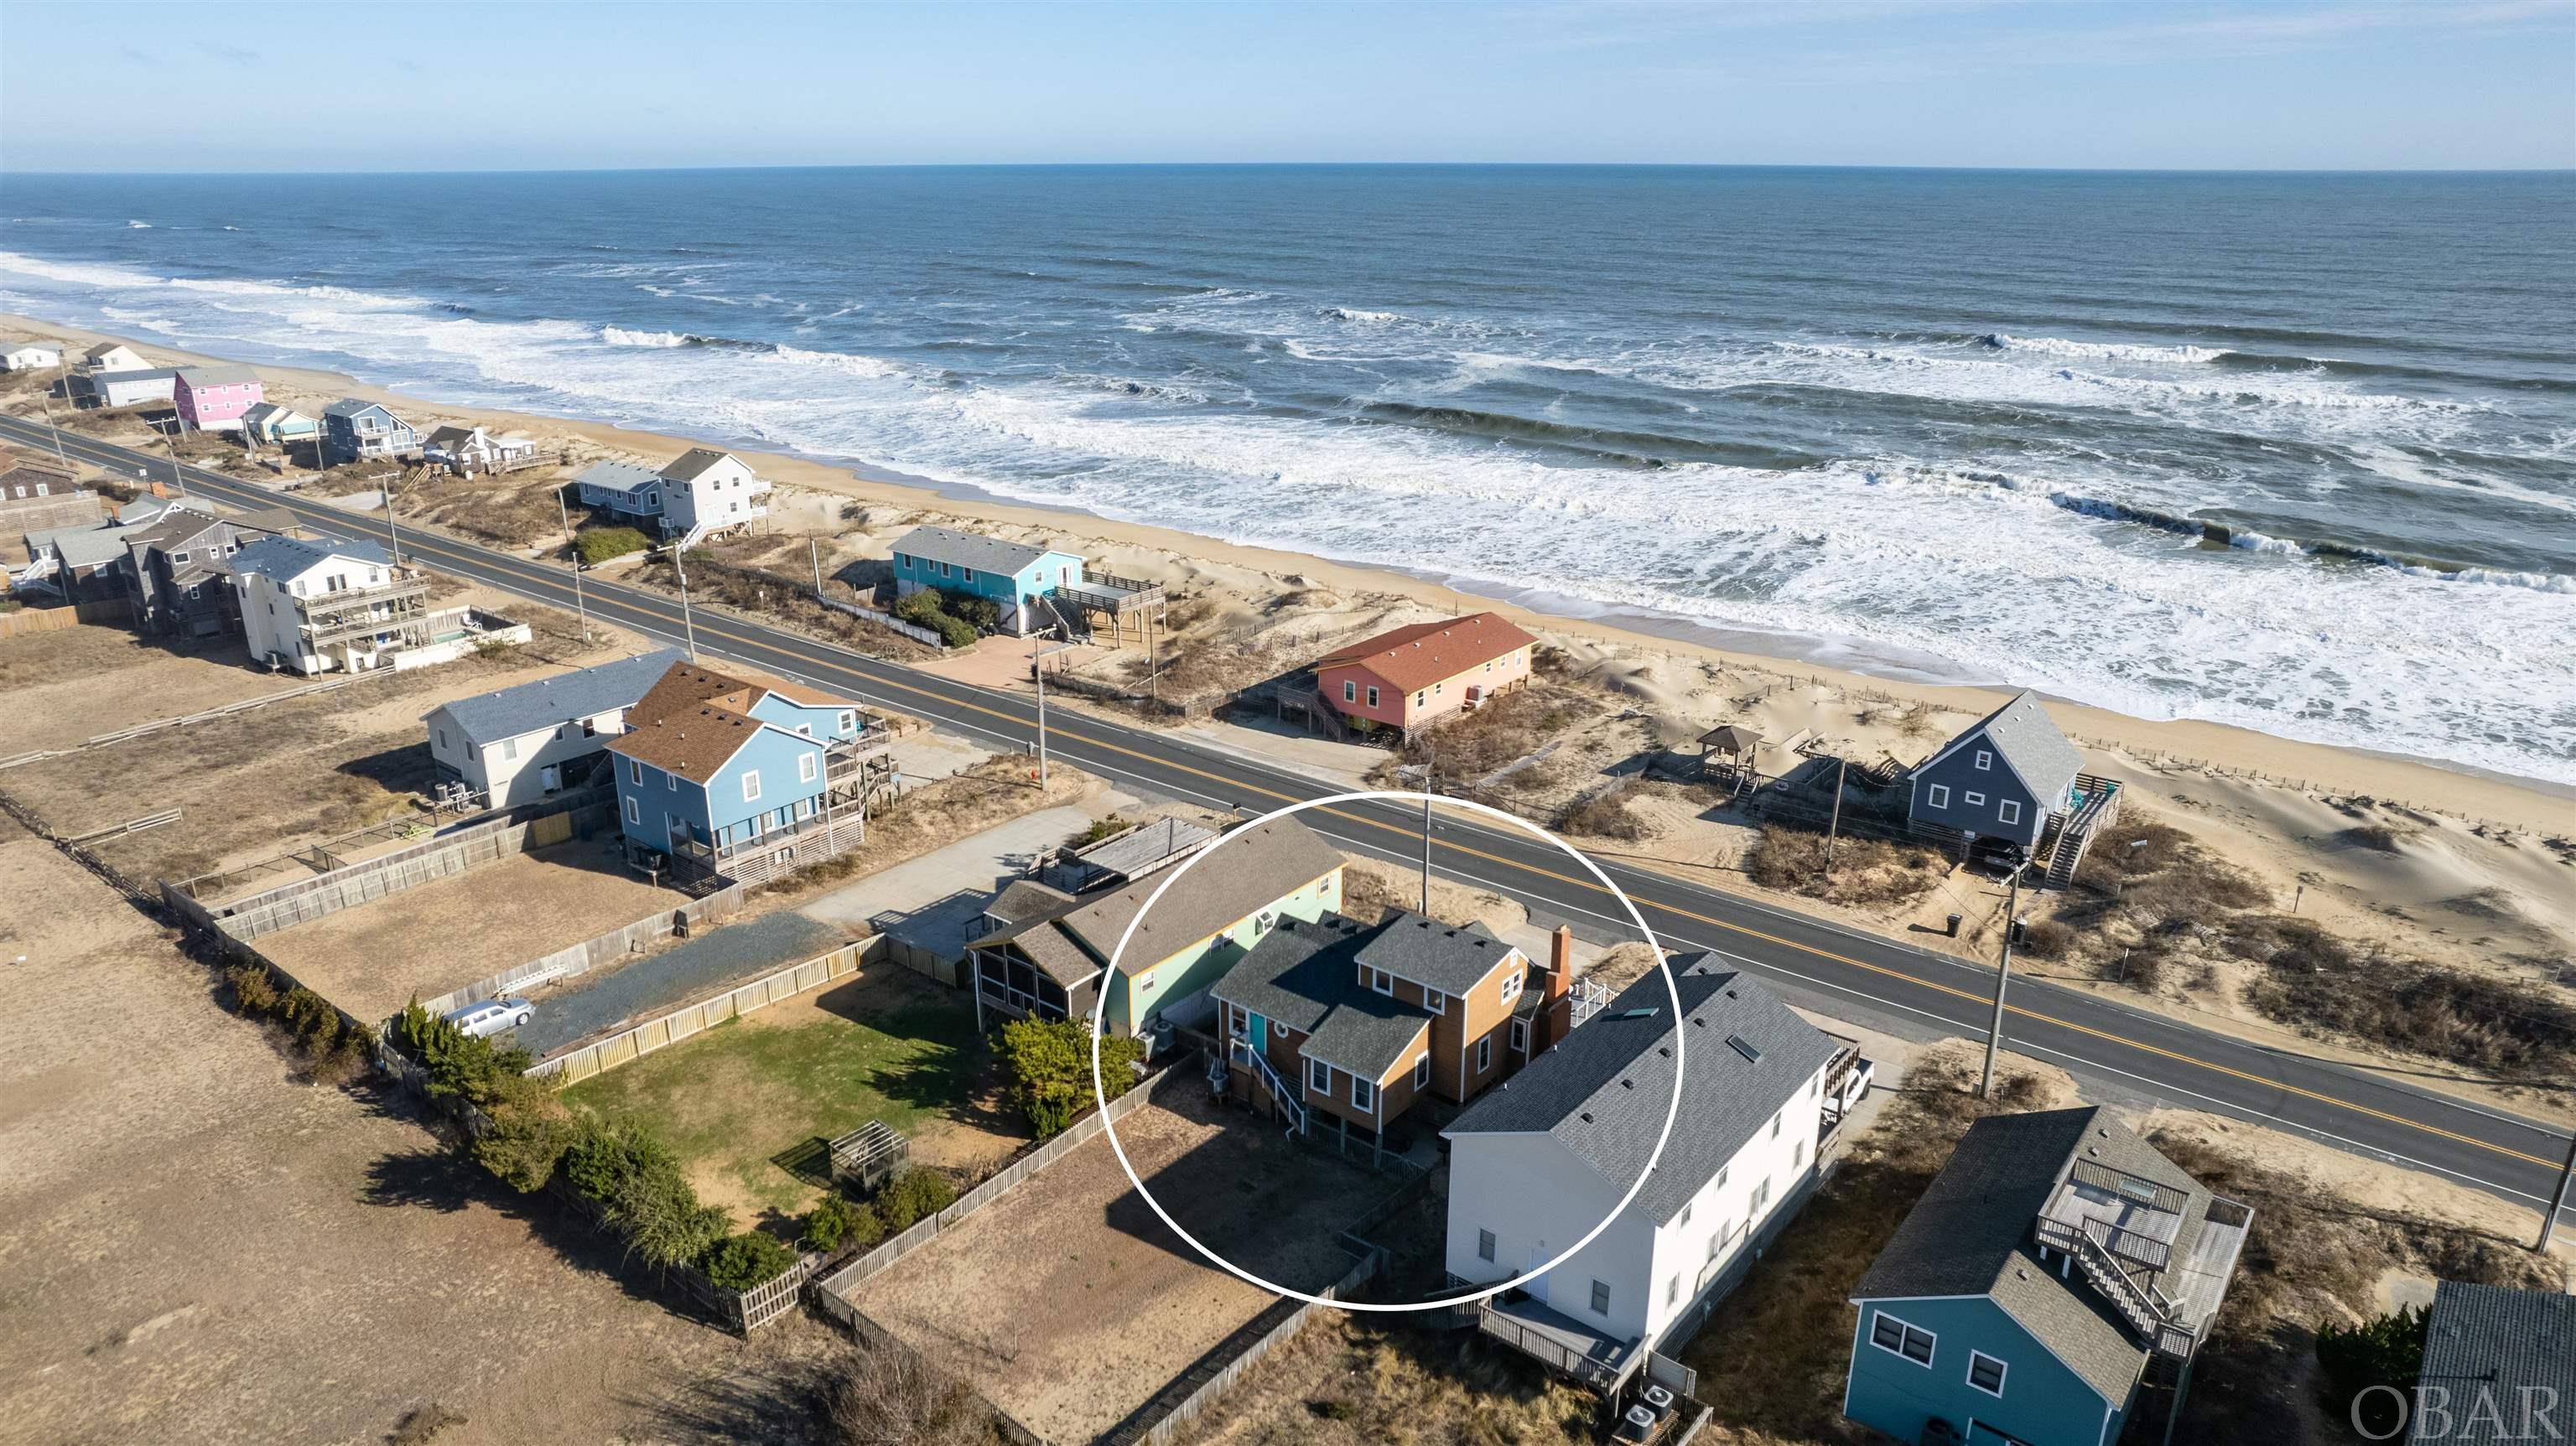 Enjoy Oceanfront views that will never change and great beach access without the risk of being right on the Oceanfront! 'The View Cottage' is truly one of a kind and has been renovated over the years, keeping its charm and character while adding modern conveniences.  The effective age is much newer than 1950, and it sleeps like a 4 bedroom (sleeps 10!).  The large ocean view window and sliders in the living area fill the space with tons of natural light, and you will love all the details throughout like the bead board ceilings, original doors, and gas fireplace with tongue and groove wood work.  The kitchen was remodeled by Ken Green and showcases Geos recycled glass counters, a wet bar with wine cooler, glass front cabinet doors, and a custom pull out pantry.  The main level also features a Queen primary bedroom with en-suite bath, a double bunk room, a full hallway bathroom, custom built ins, a 500 game arcade, and a laundry area.  Relax on the brand new oversized front deck with new hot tub where you will experience beautiful ocean views, sunrises, and gorgeous moon lit nights over the ocean. You will be so close to the ocean that you may see dolphin right from the front deck on any given day!  The 2nd level offers 2 additional bedrooms (Queen and Full) that share a hallway half bath.  You will find plenty of storage with lots of closet space throughout, and a pull down attic with flooring and Thermax insulation.  The front Ocean view sun deck offers plenty of seating with quality polywood furniture, and the exterior carport area provides a great shaded additional outdoor living space with a sofa, table and chairs, picnic table, and outdoor shower.  Hurricane shutters on the front windows and doors offer added built-in protection when needed. The fenced in backyard is perfect for lawn games, and you will find everything you need in the utility shed from corn hole boards to beach gear and a beach cart to carry everything over to the beach!  You will fall in love with this adorable cottage that offers all the comforts of home and an absolutely ideal location in Kitty Hawk.  You will never lose your Ocean views as the vacant Oceanfront lots are not buildable.  Over 10% estimated gross rental return with up to $106K projected for the 2024 season!  Recent upgrades include a NEW exterior electrical service panel and new water heater '22, NEW smart tv's, and a brand NEW front and back deck with trex, NEW deck pilings, NEW hot tub, NEW fortified roof, and NEW main level heat pump in '23. The views are even better in person, and you cannot beat this location in Kitty Hawk!  The owners use a non-deeded beach access a few houses down to the South...see aerial photo for details!